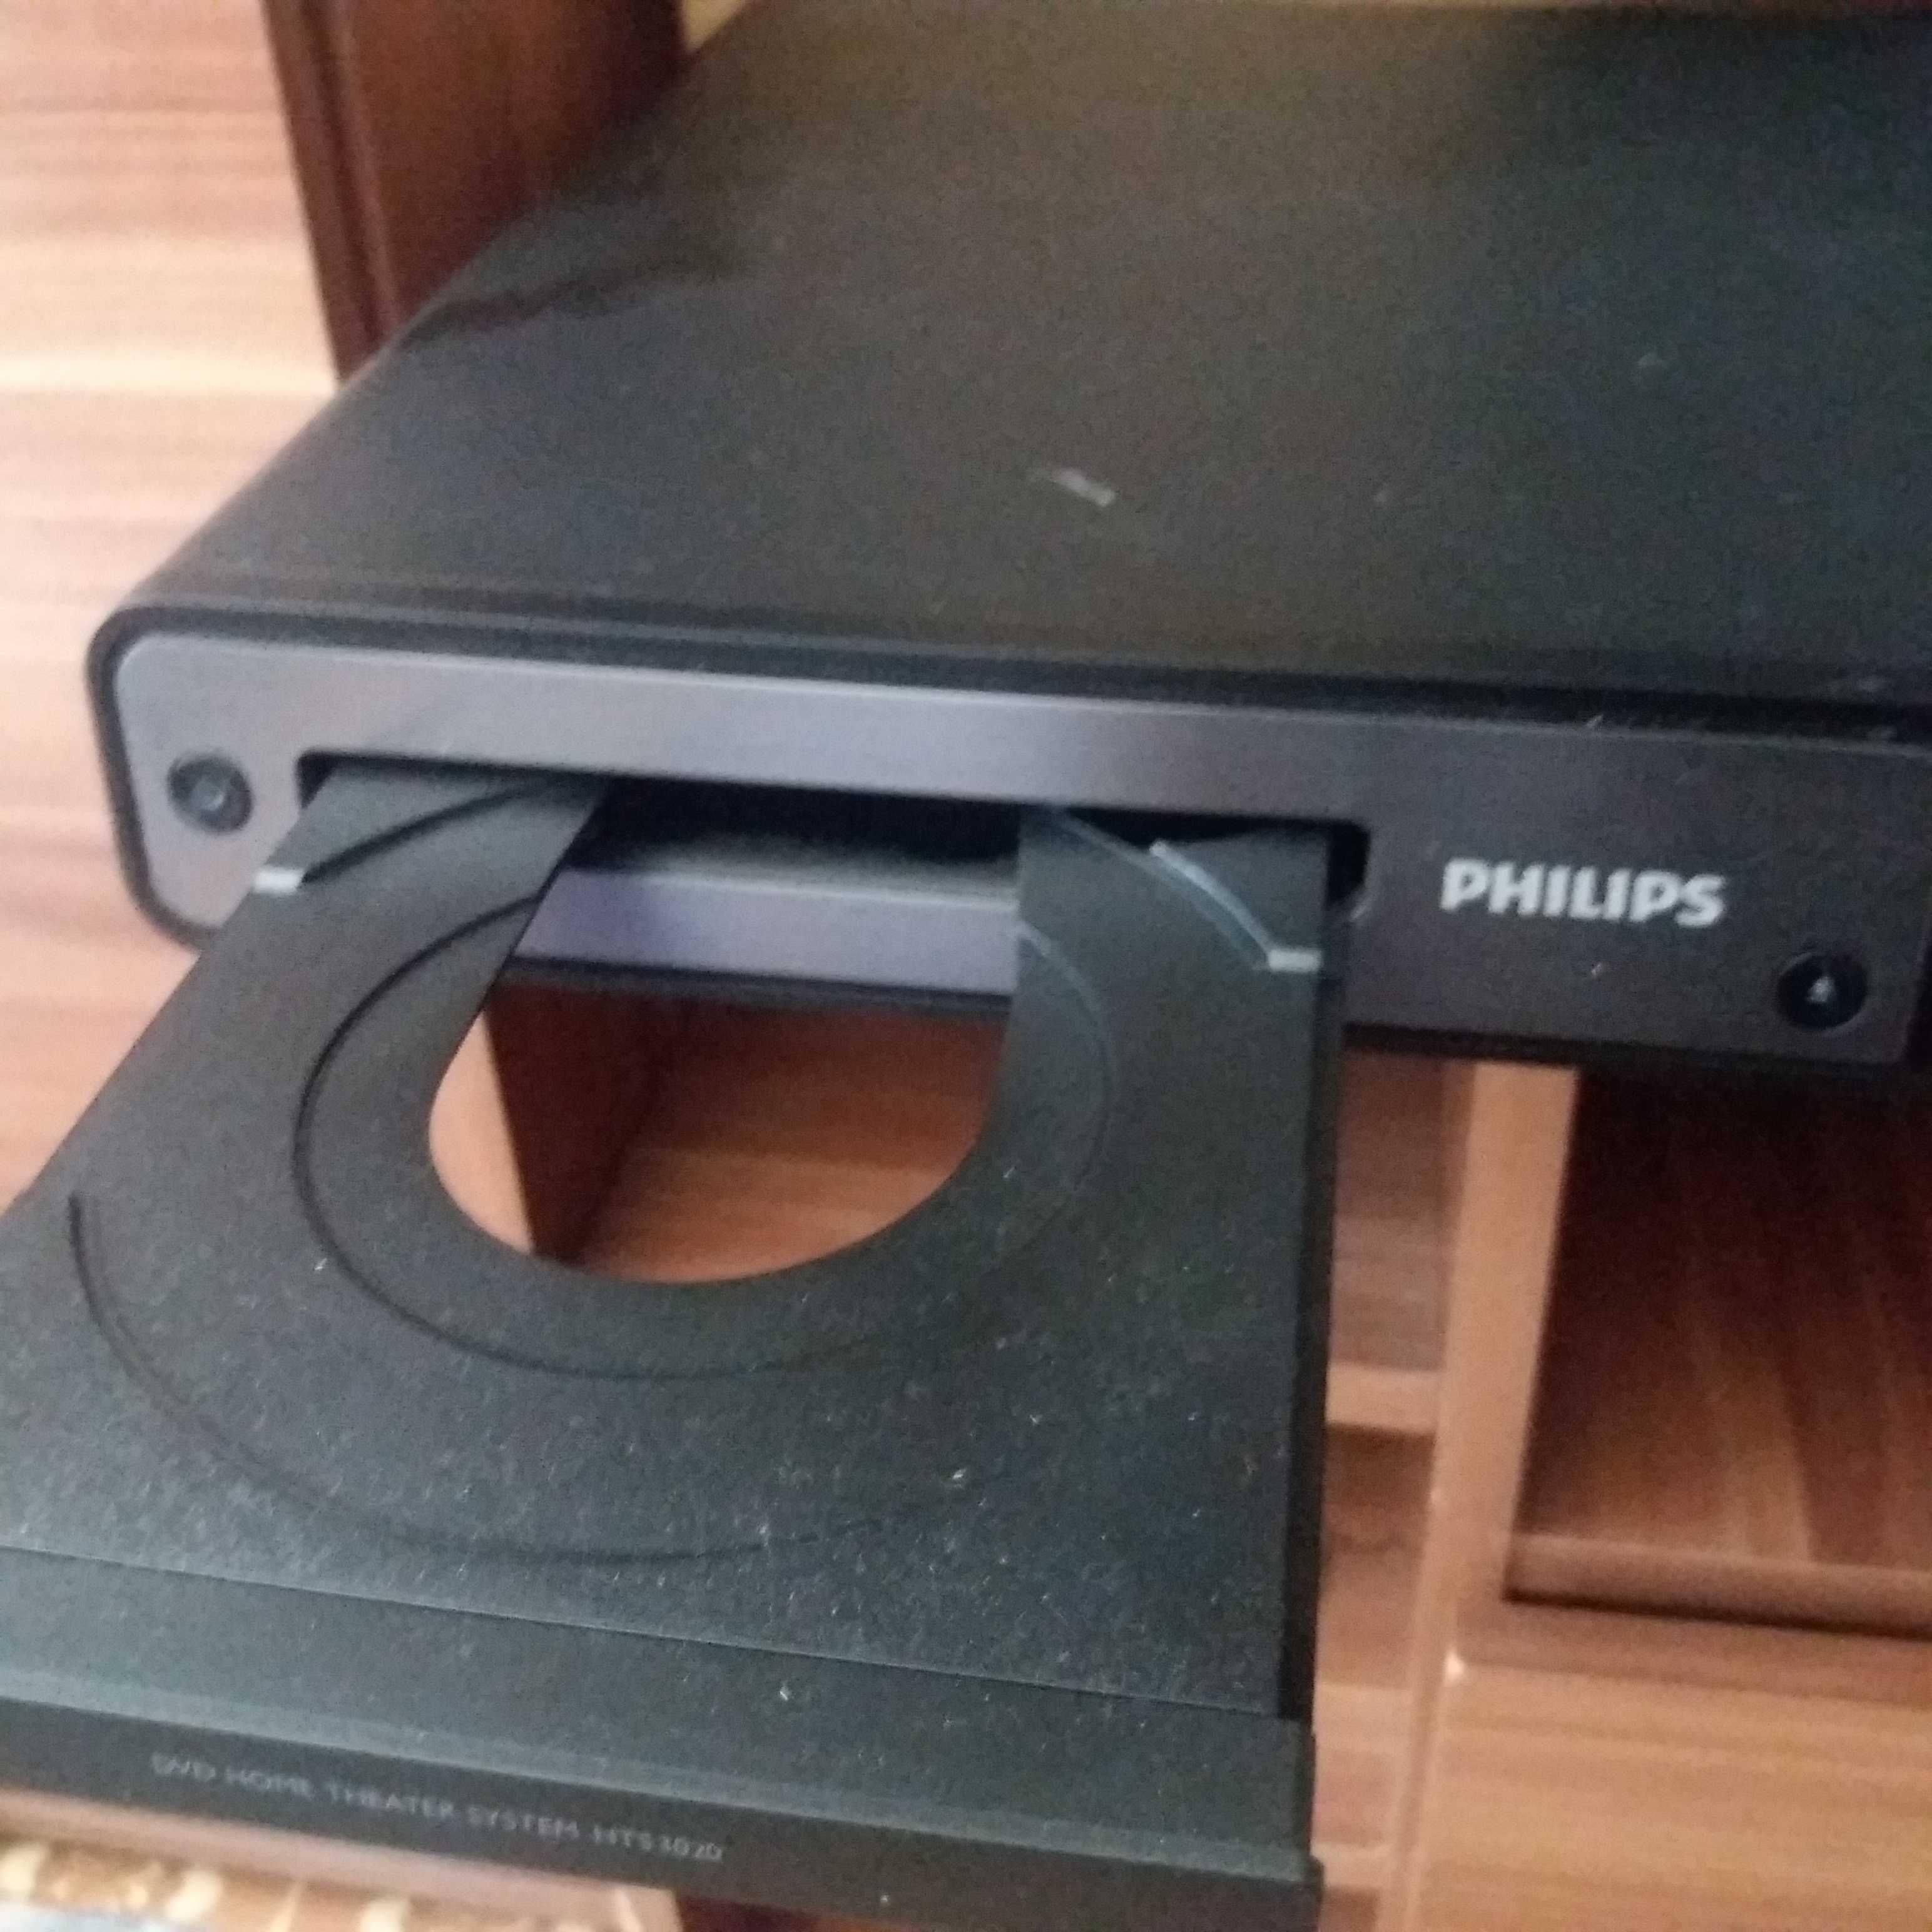 DVD video Player -PHILIPS